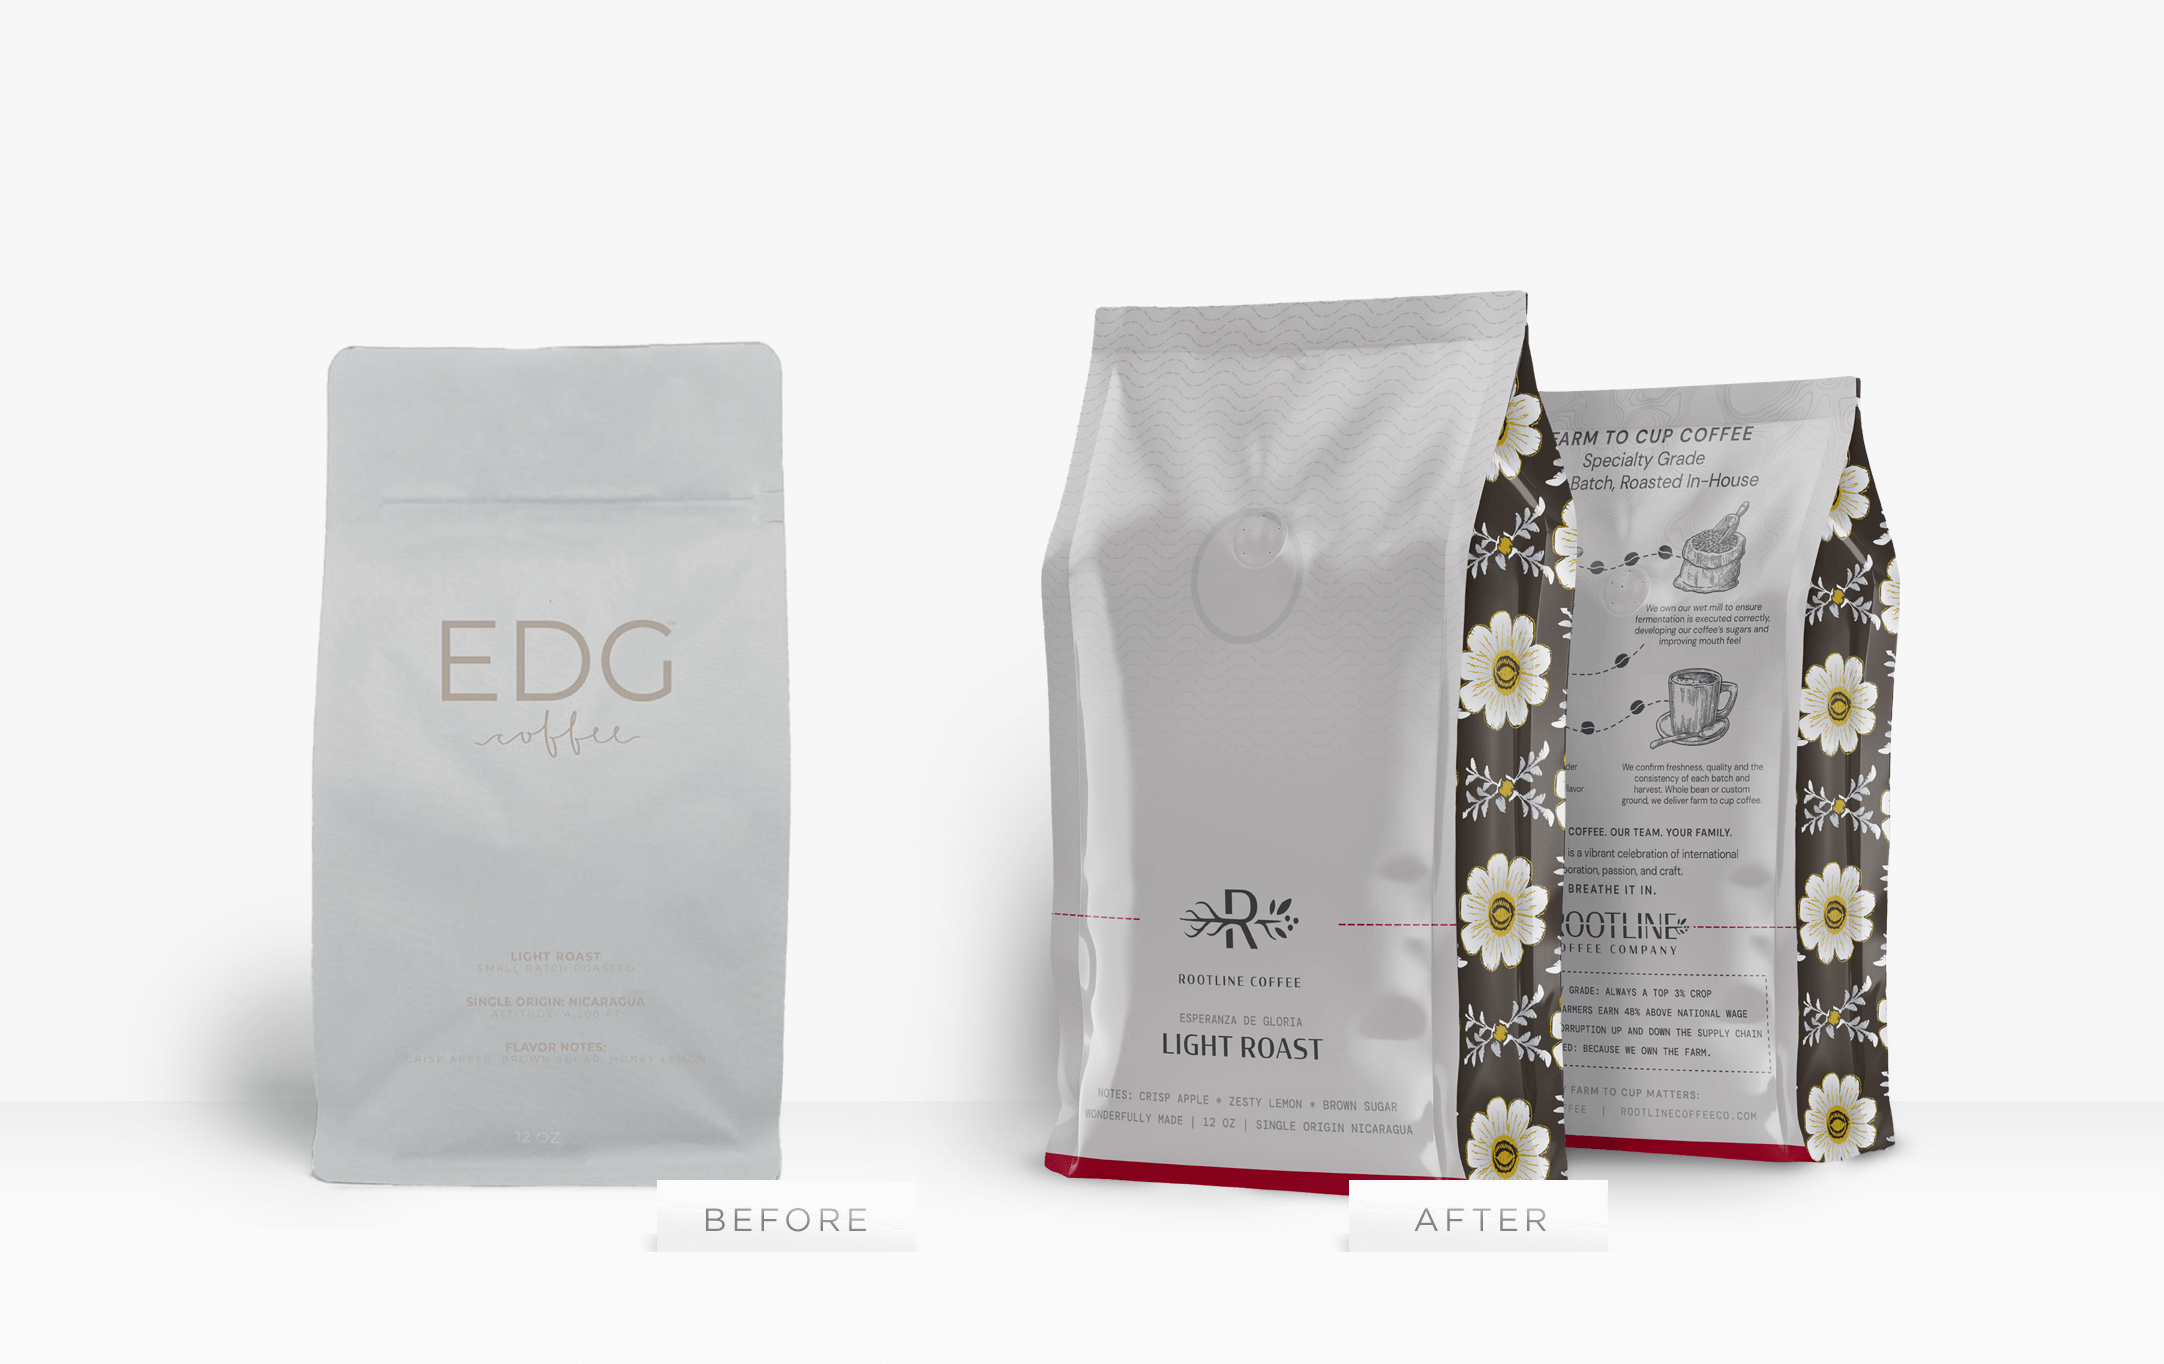 Rootline Light Roast Coffee Bag Design - Before and After